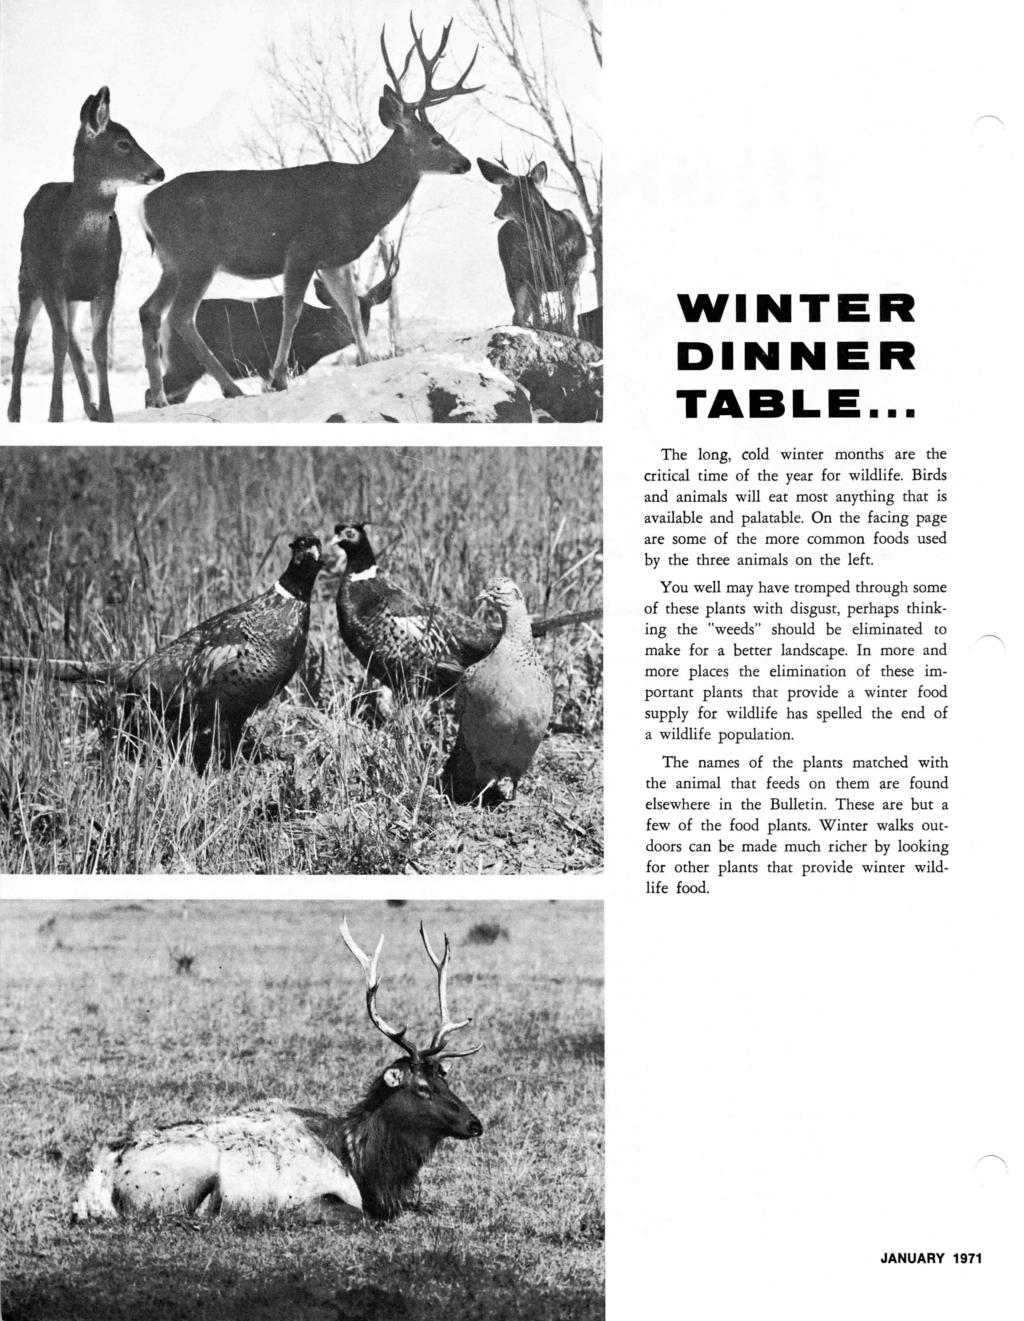 WINTER DINNER TABLE... The long, cold winter months are the critical time of the year for wildlife. Birds and animals will eat most anything that is available and palatable.